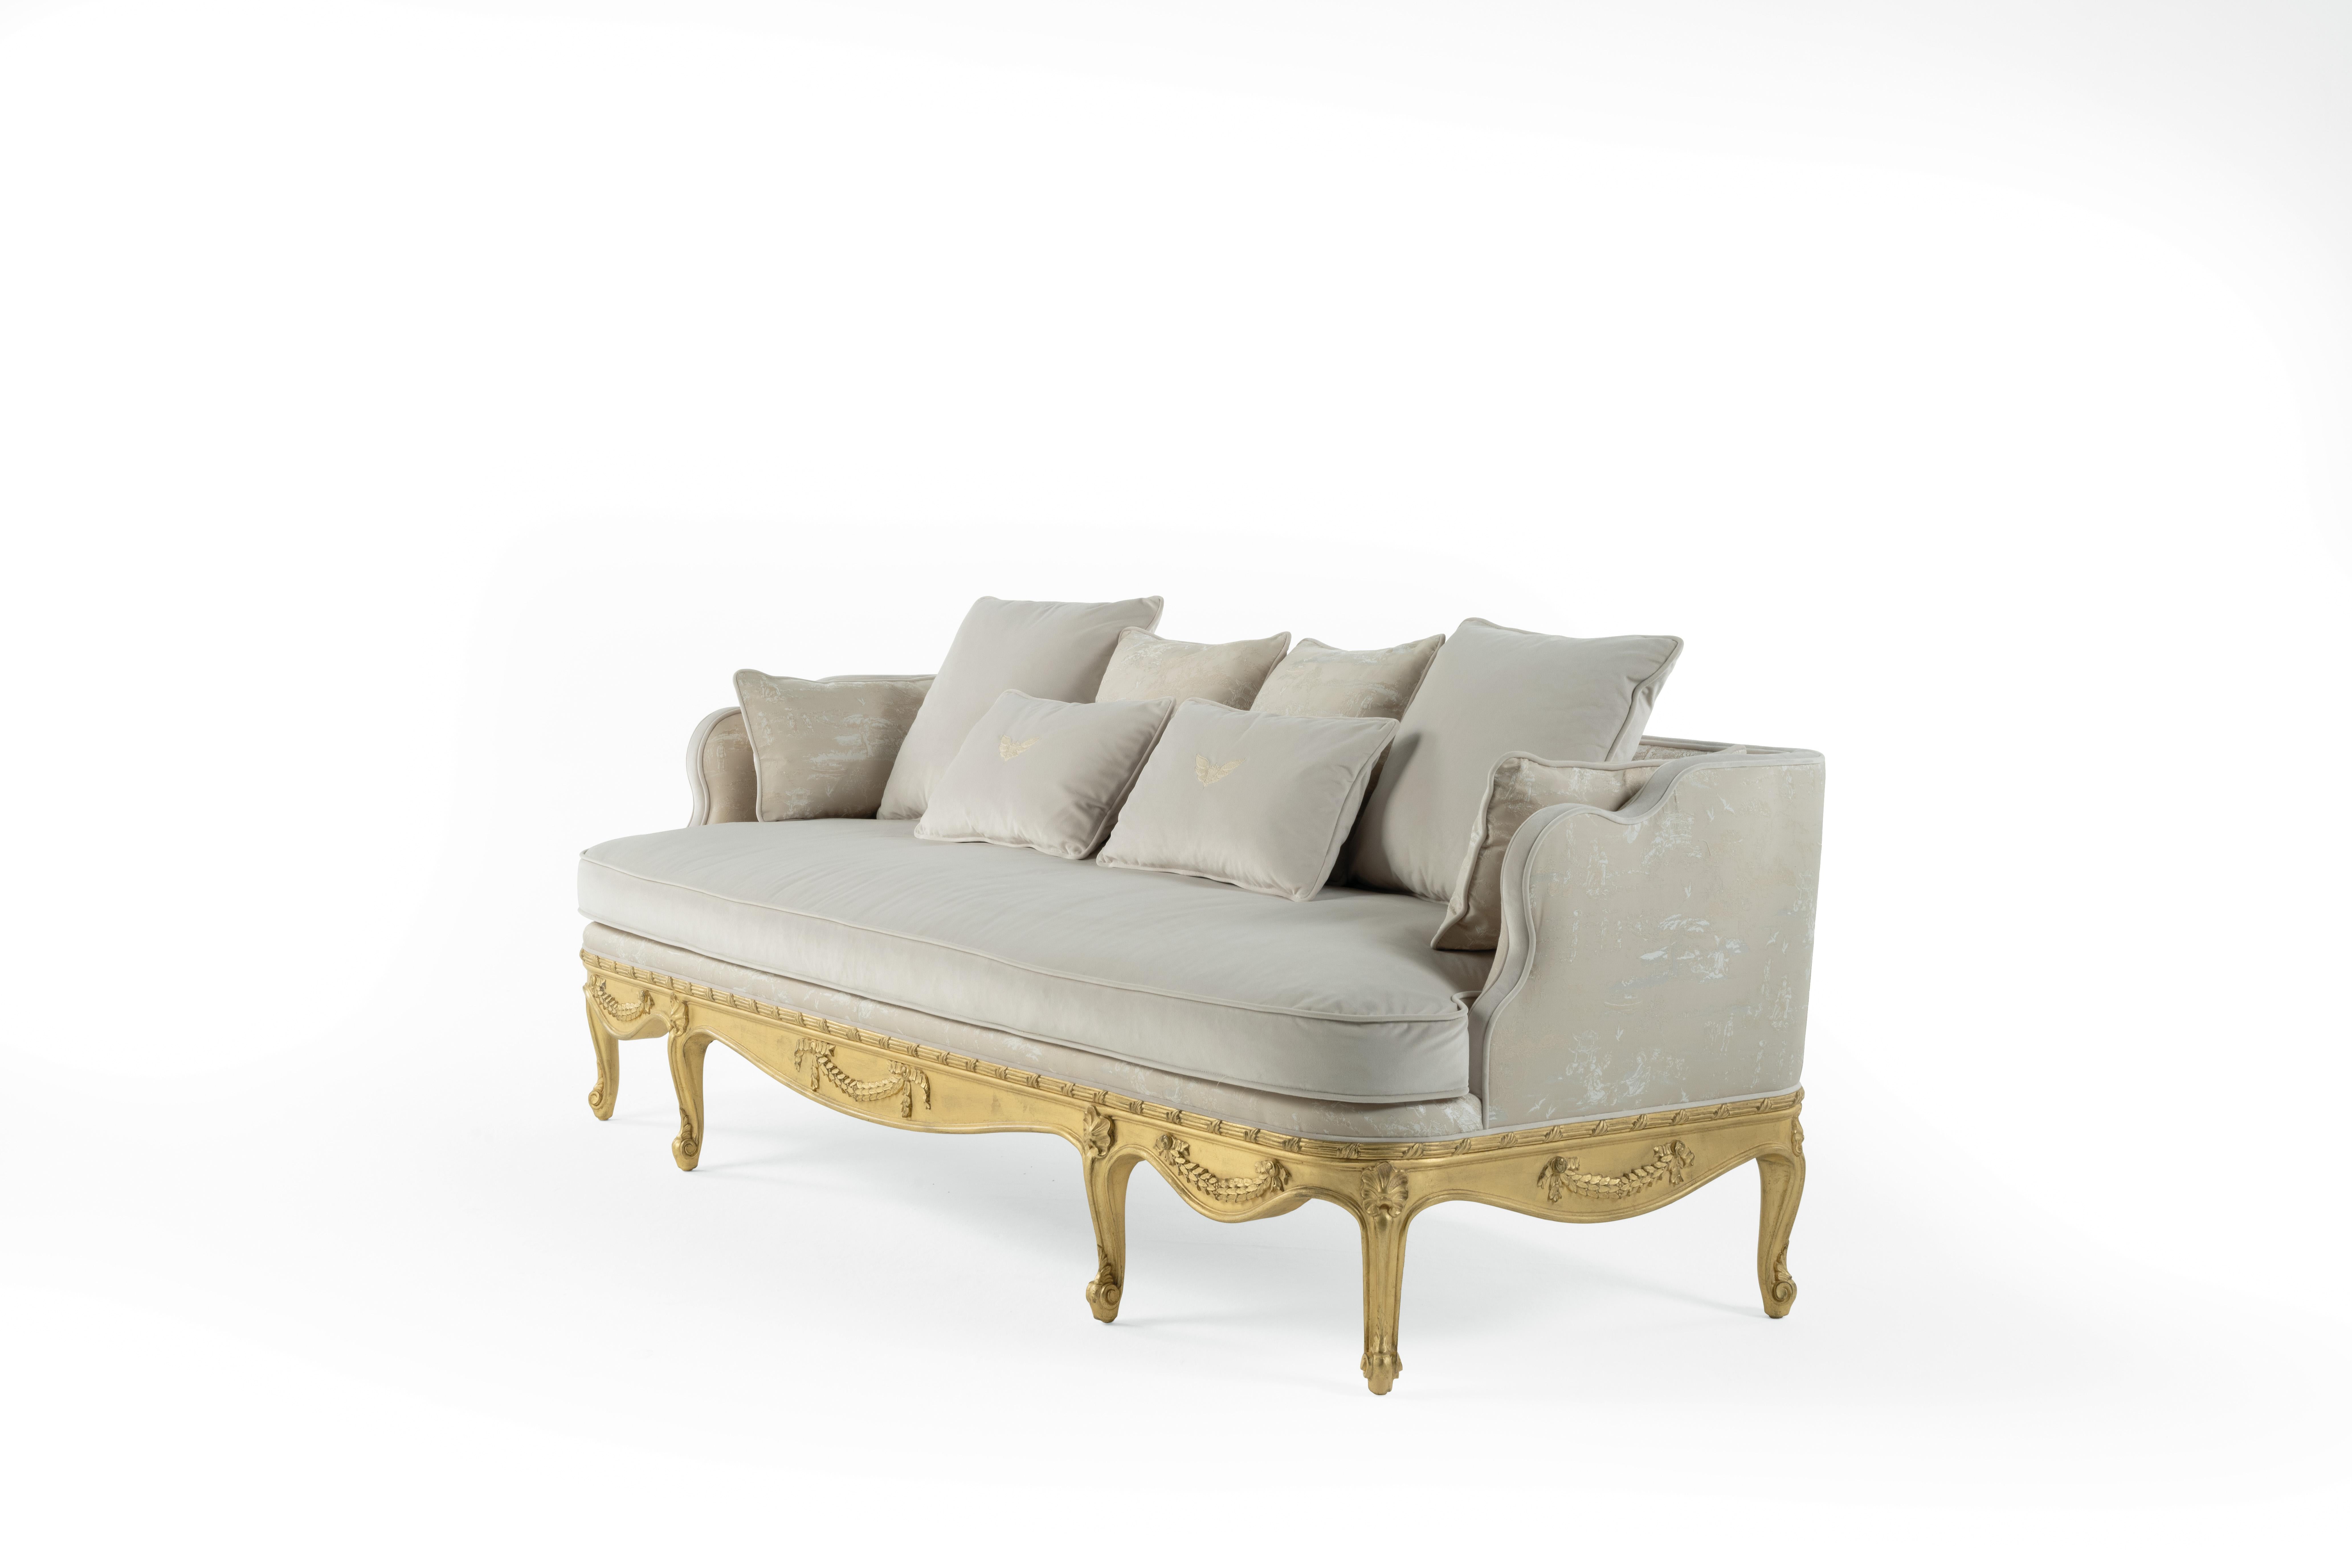 Italian 21st Century Verveine 2-Seater Sofa in Fabric with Gold Leaf finishing For Sale